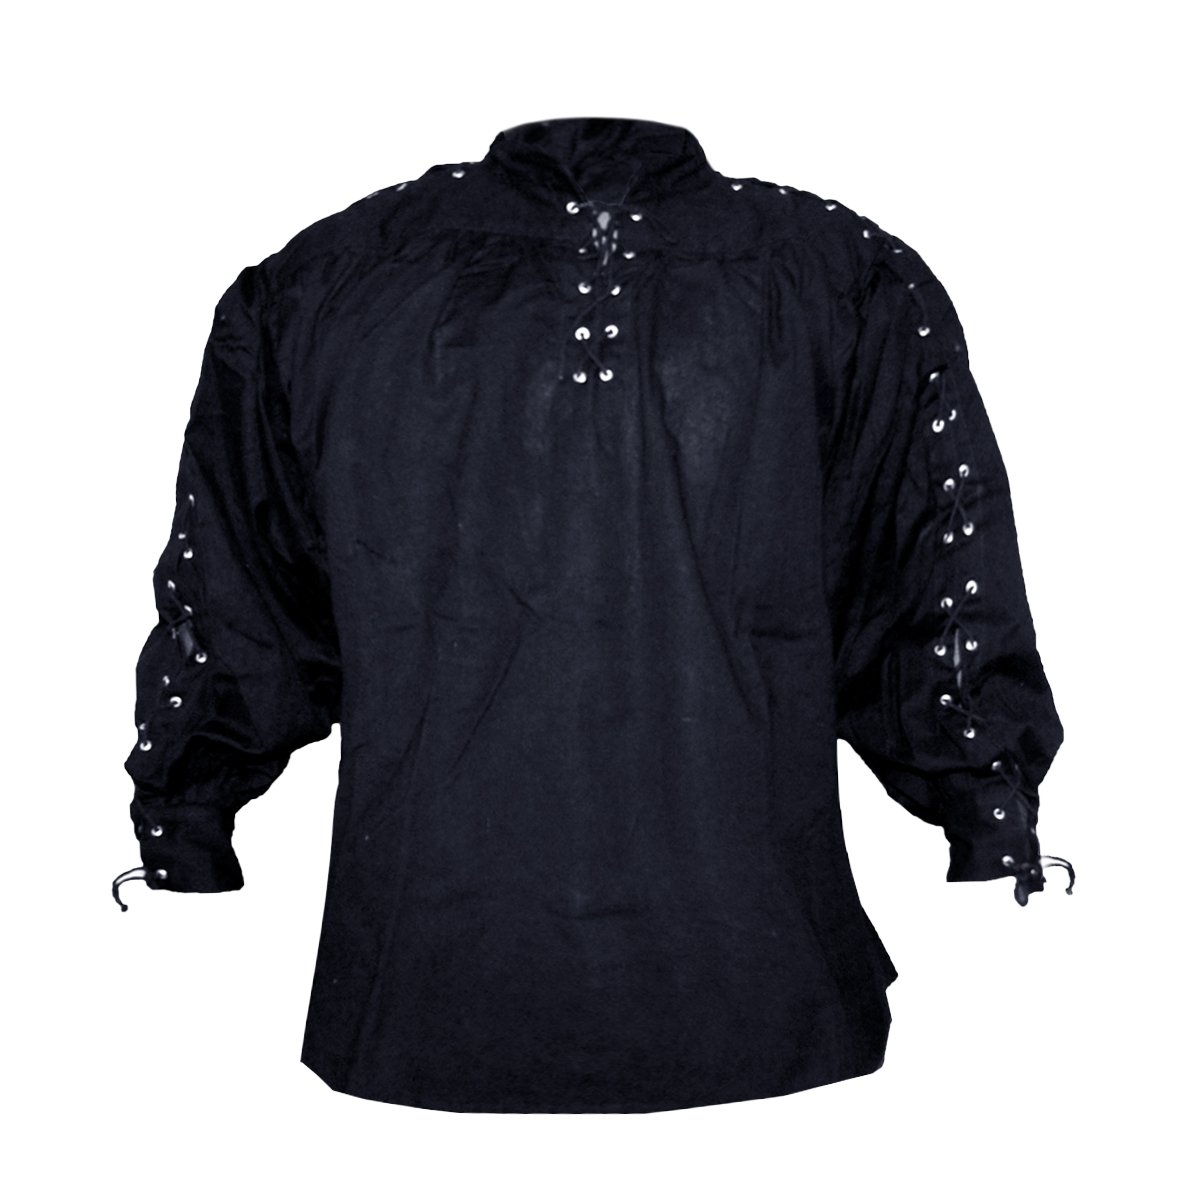 Collarless cotton shirt (laced neck & sleeves) - black, size M